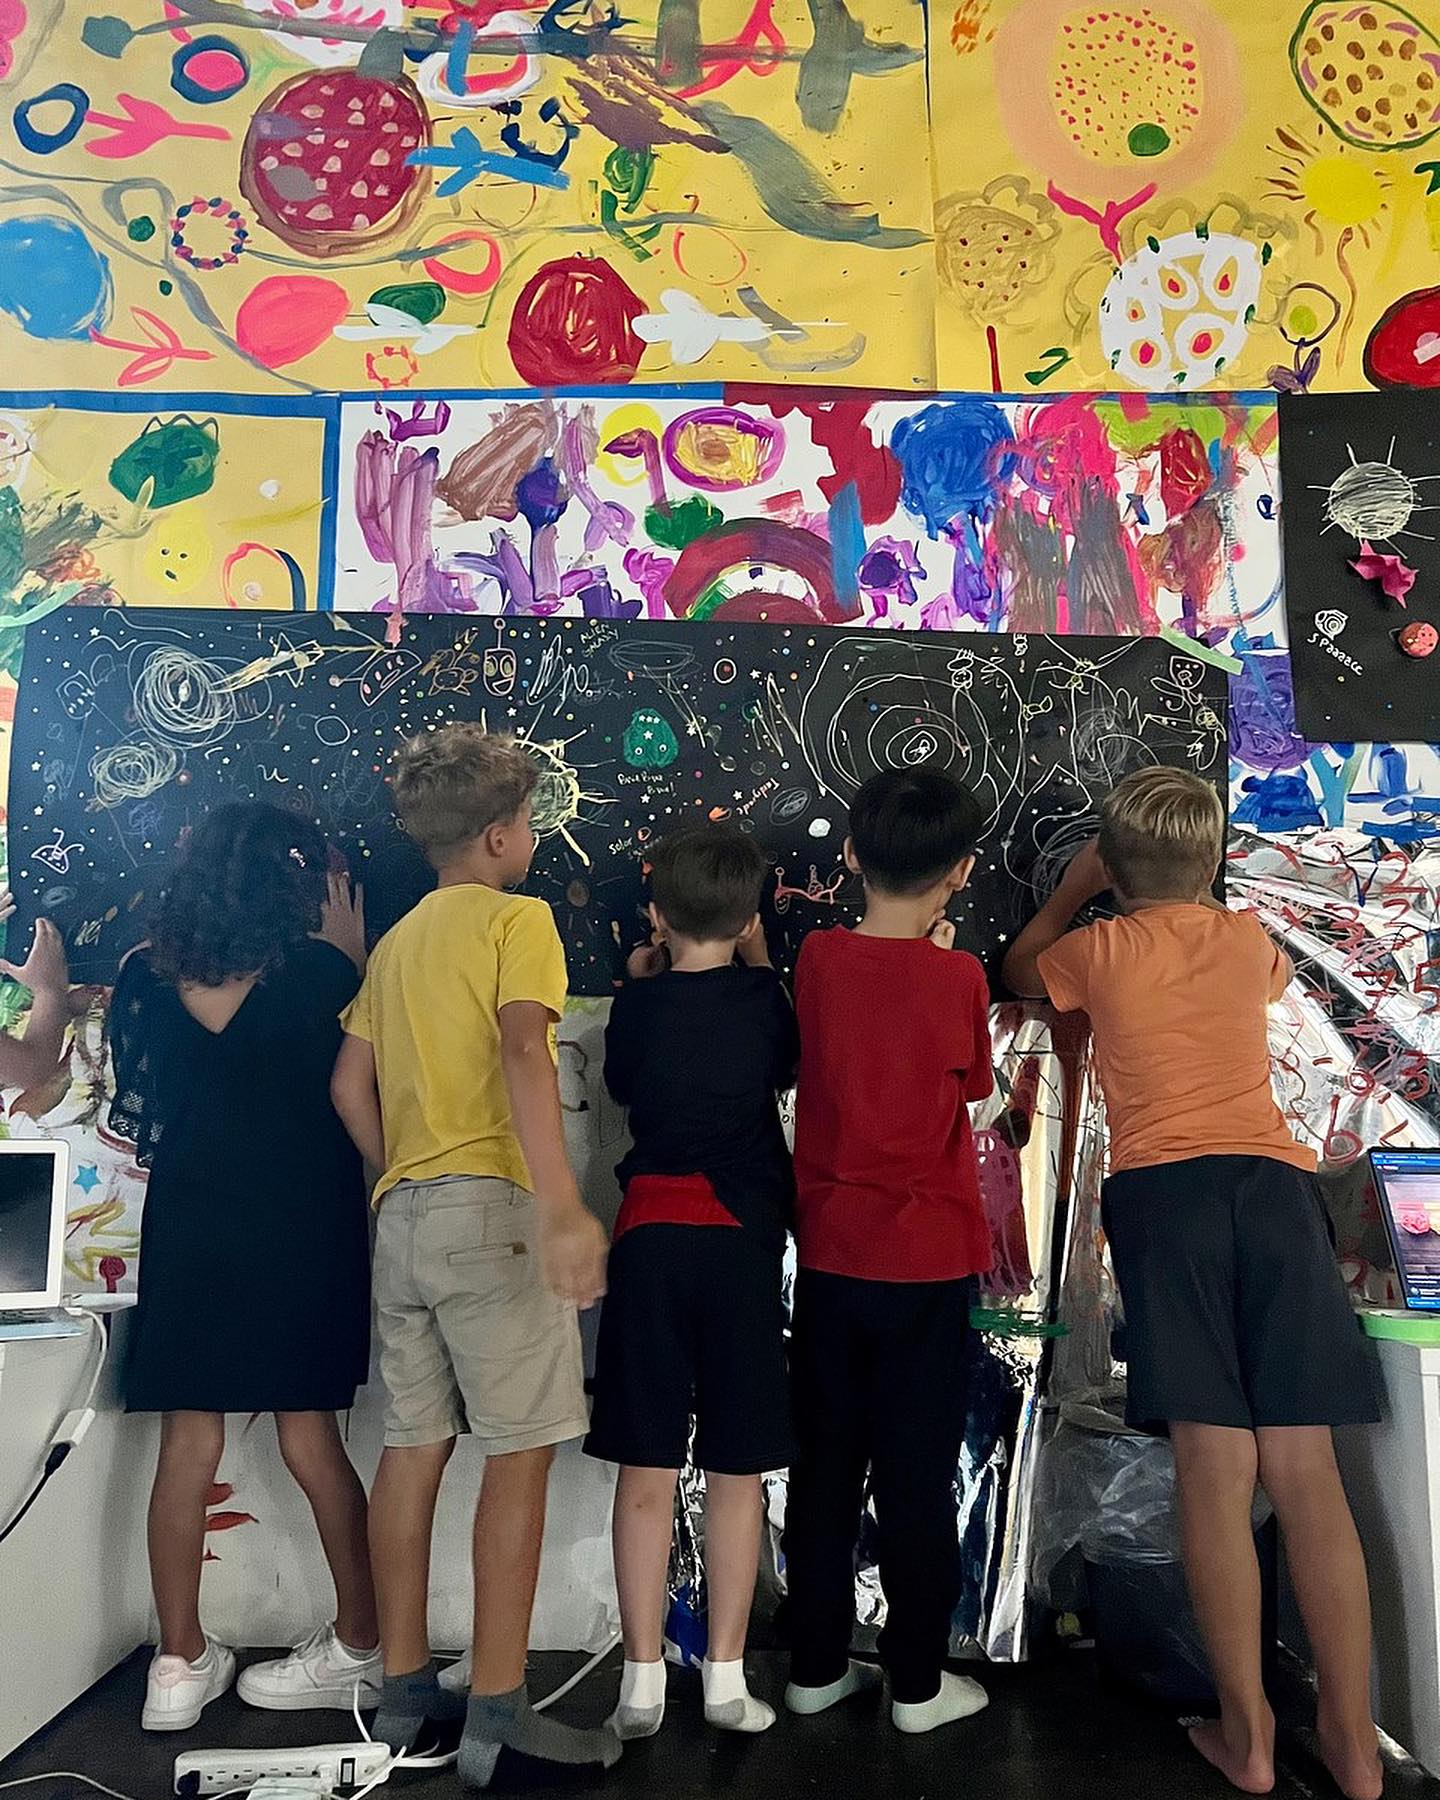 Kids painting on a mural of space